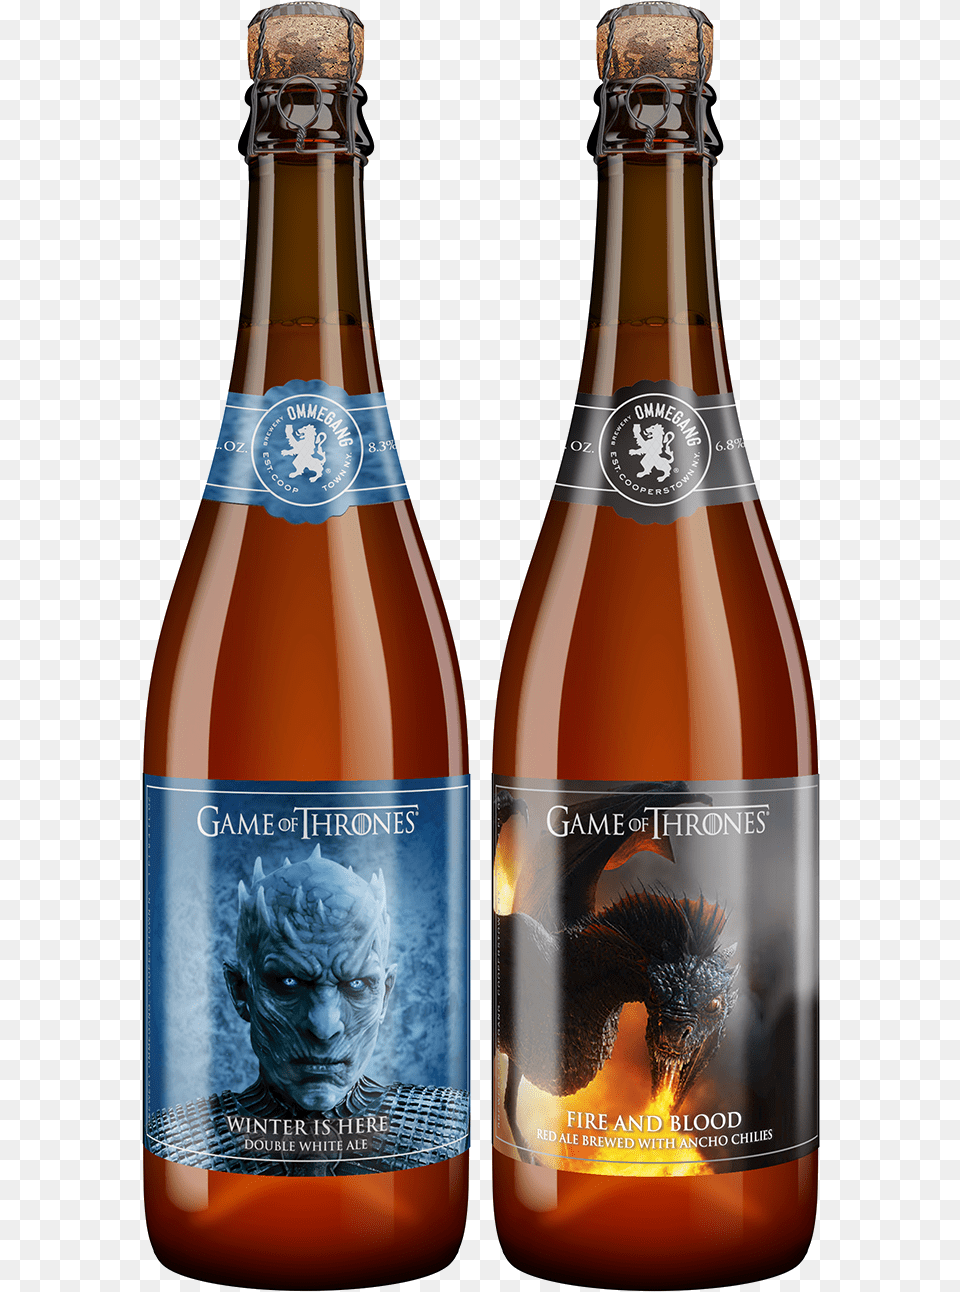 Ommegang Game Of Thrones Fire And Blood 2017 Bottle Ommegang Game Of Thrones Beer, Alcohol, Beer Bottle, Beverage, Liquor Free Png